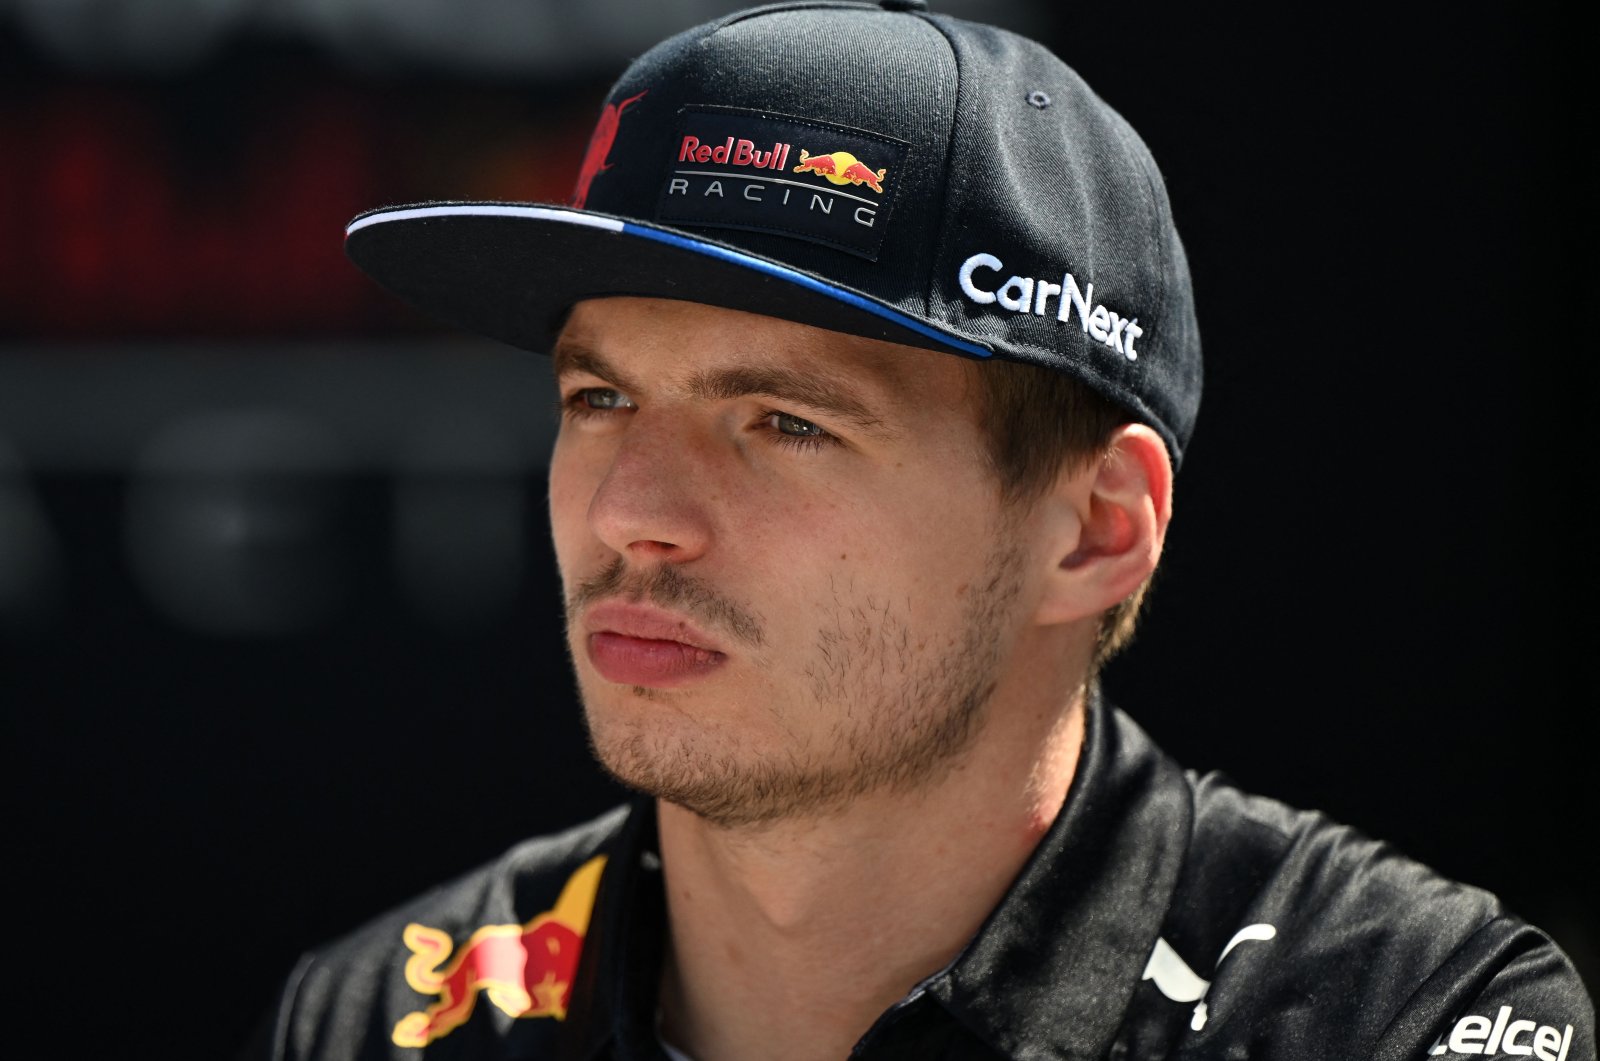 Red Bull's Dutch driver Max Verstappen is pictured ahead of the Formula One Azerbaijan Grand Prix at the Baku City Circuit in Baku on June 9, 2022. (Photo by OZAN KOSE / AFP)